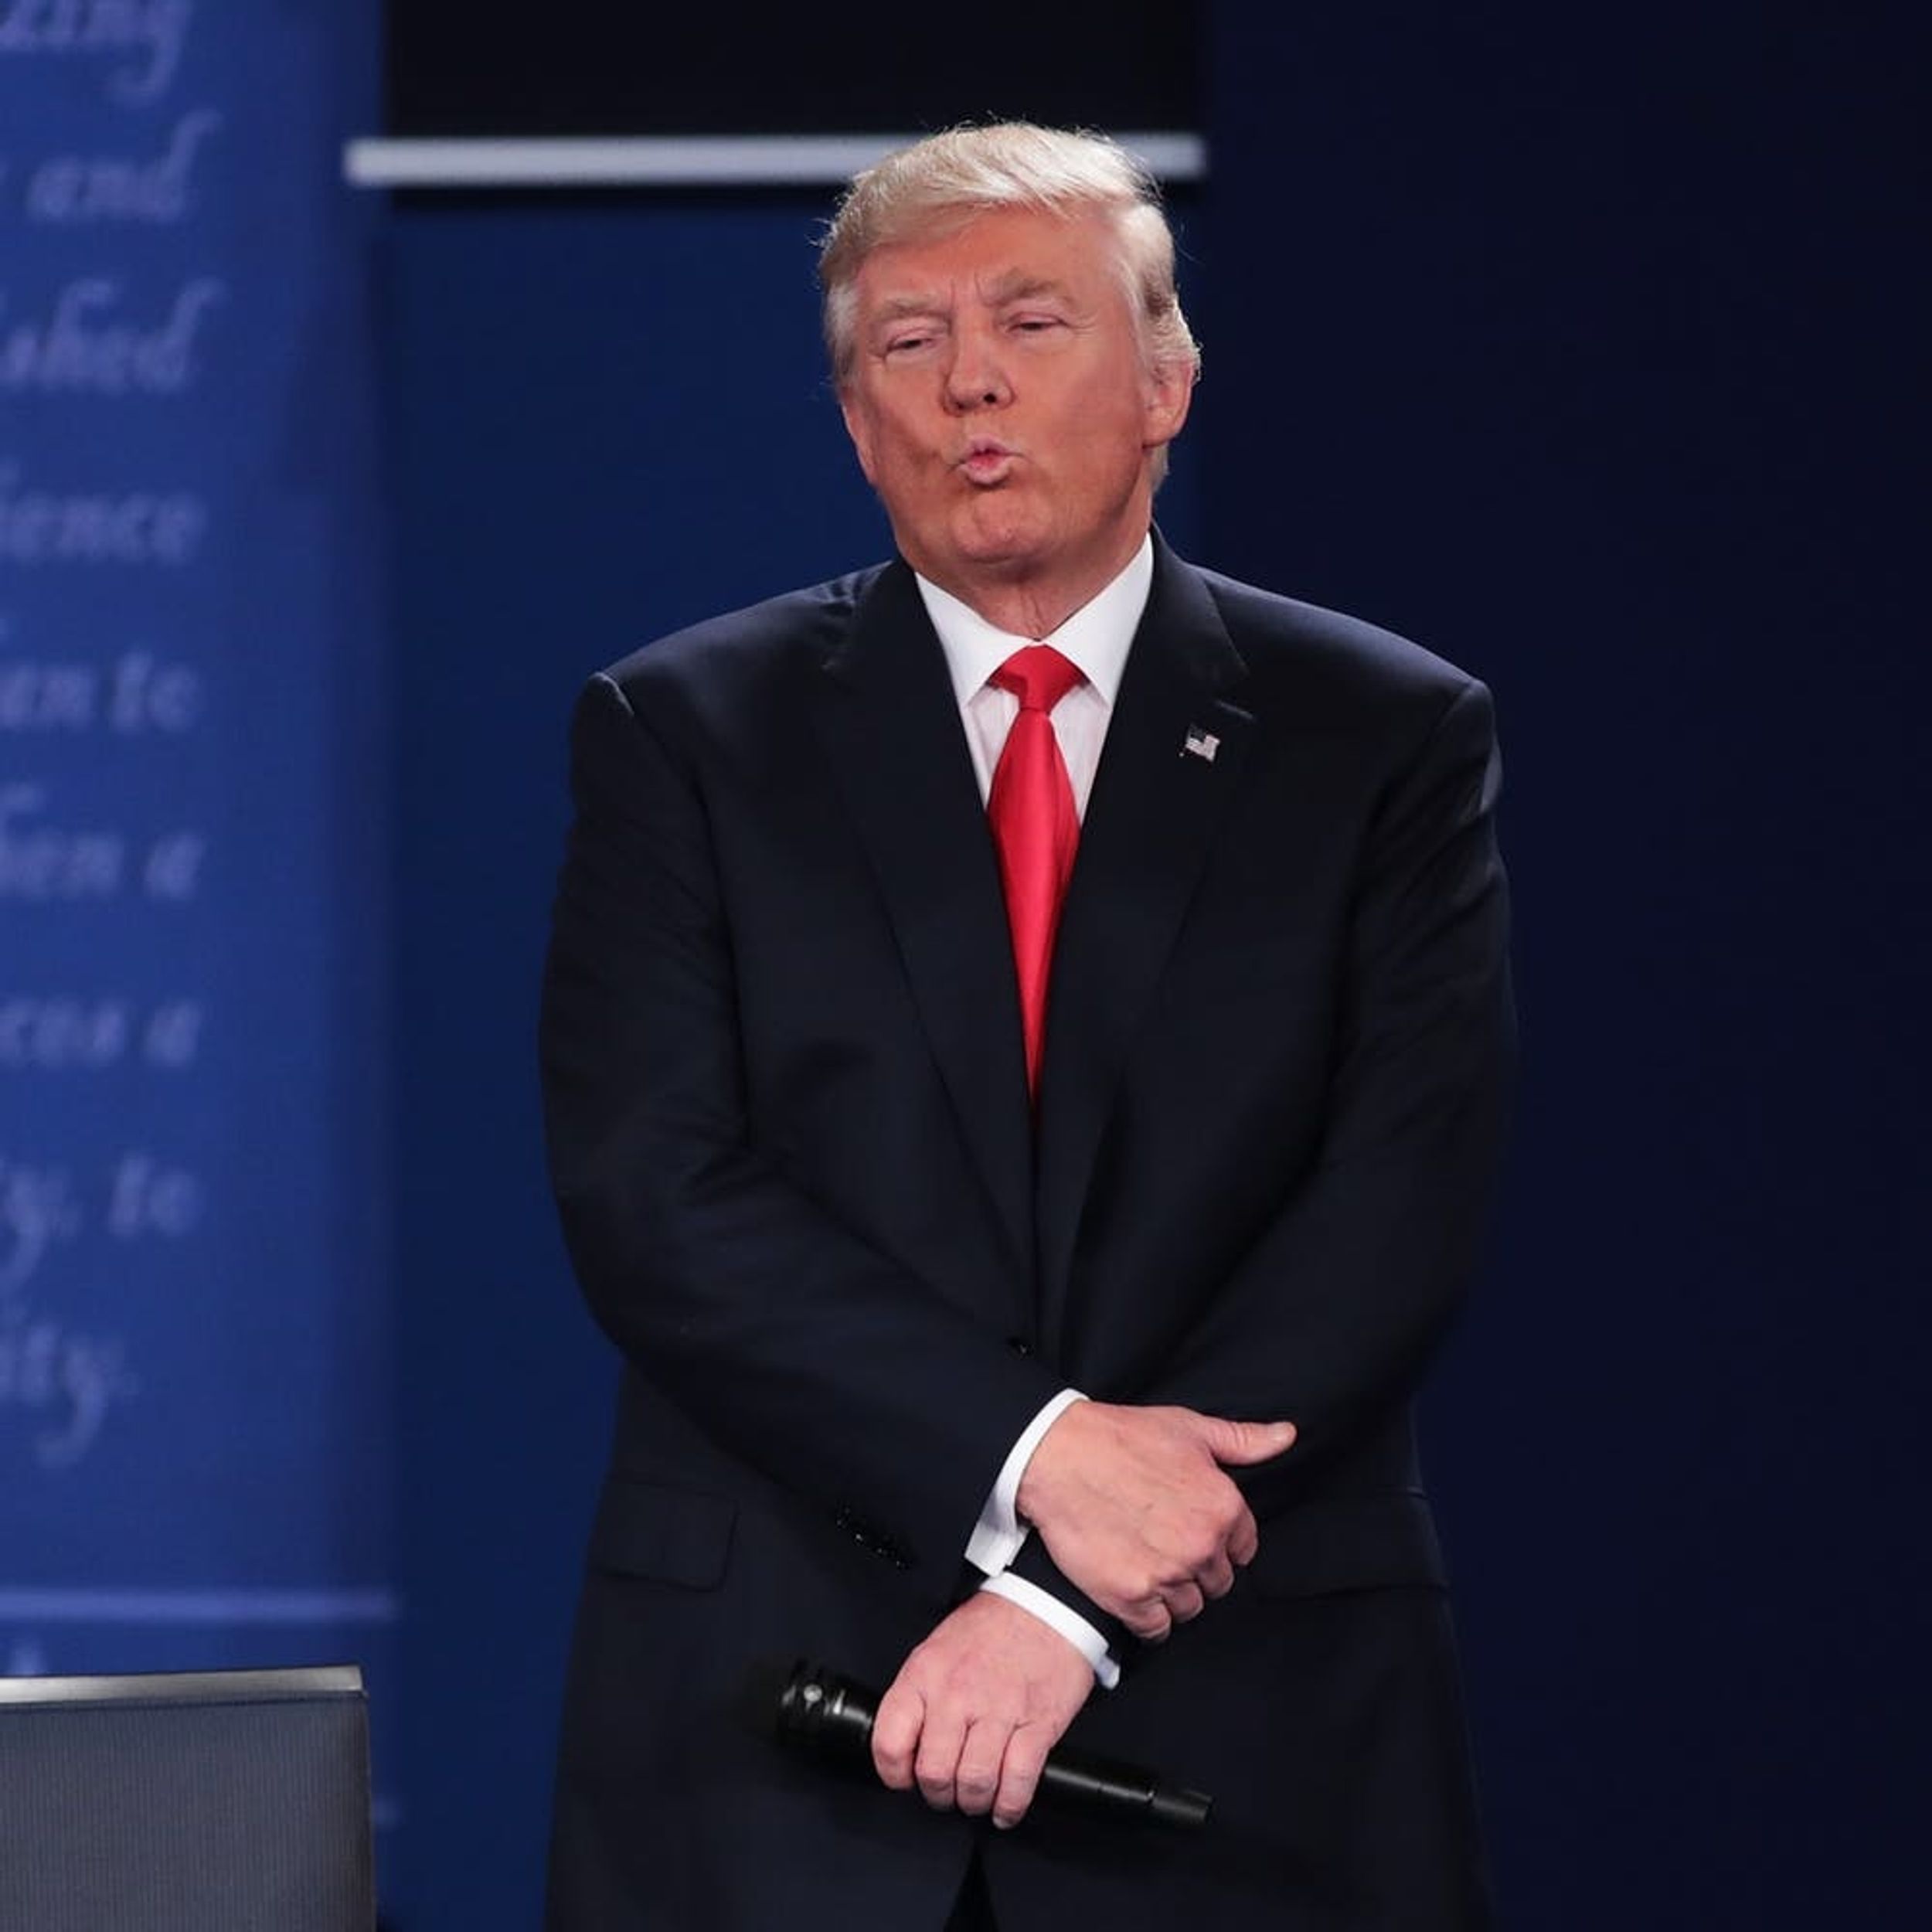 Here’s Why People Are Freaking Out Over Trump’s Debate Body Language